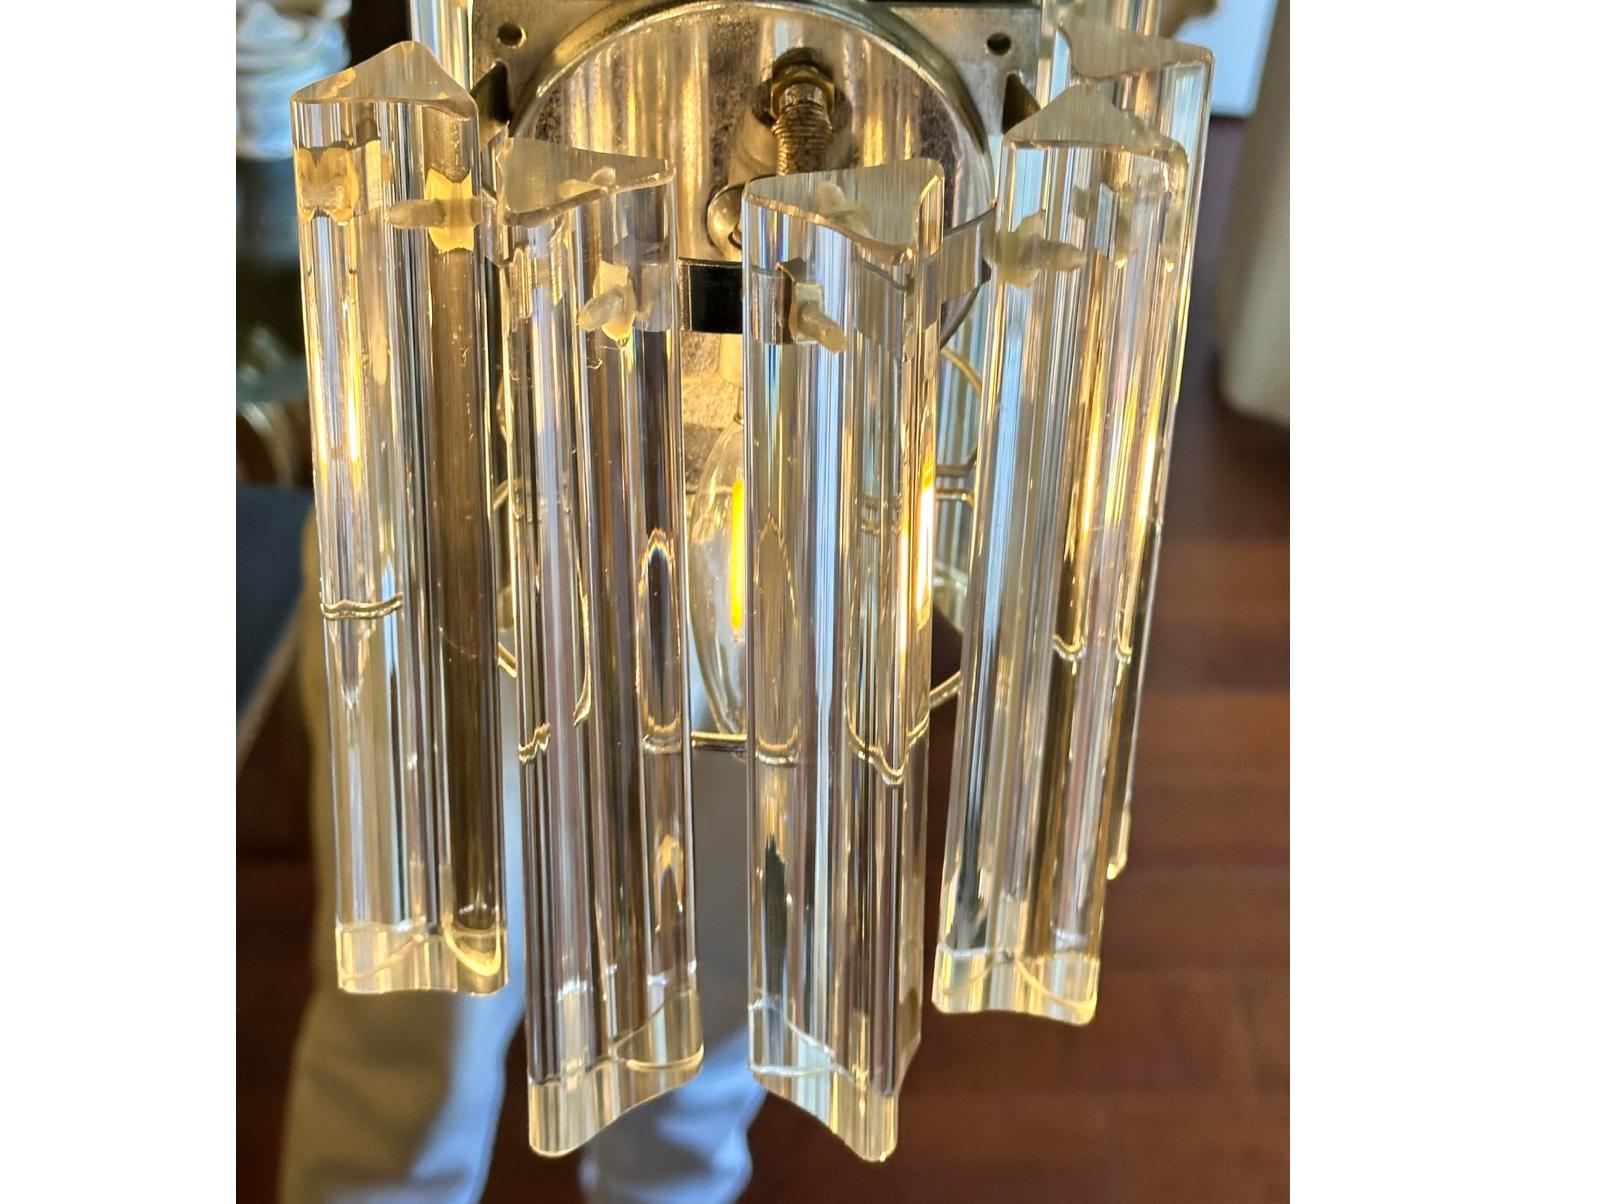 Pair of Mid Century Venini Italian Crystal Sconces. This listing is for one pair but we actually have three pair available.